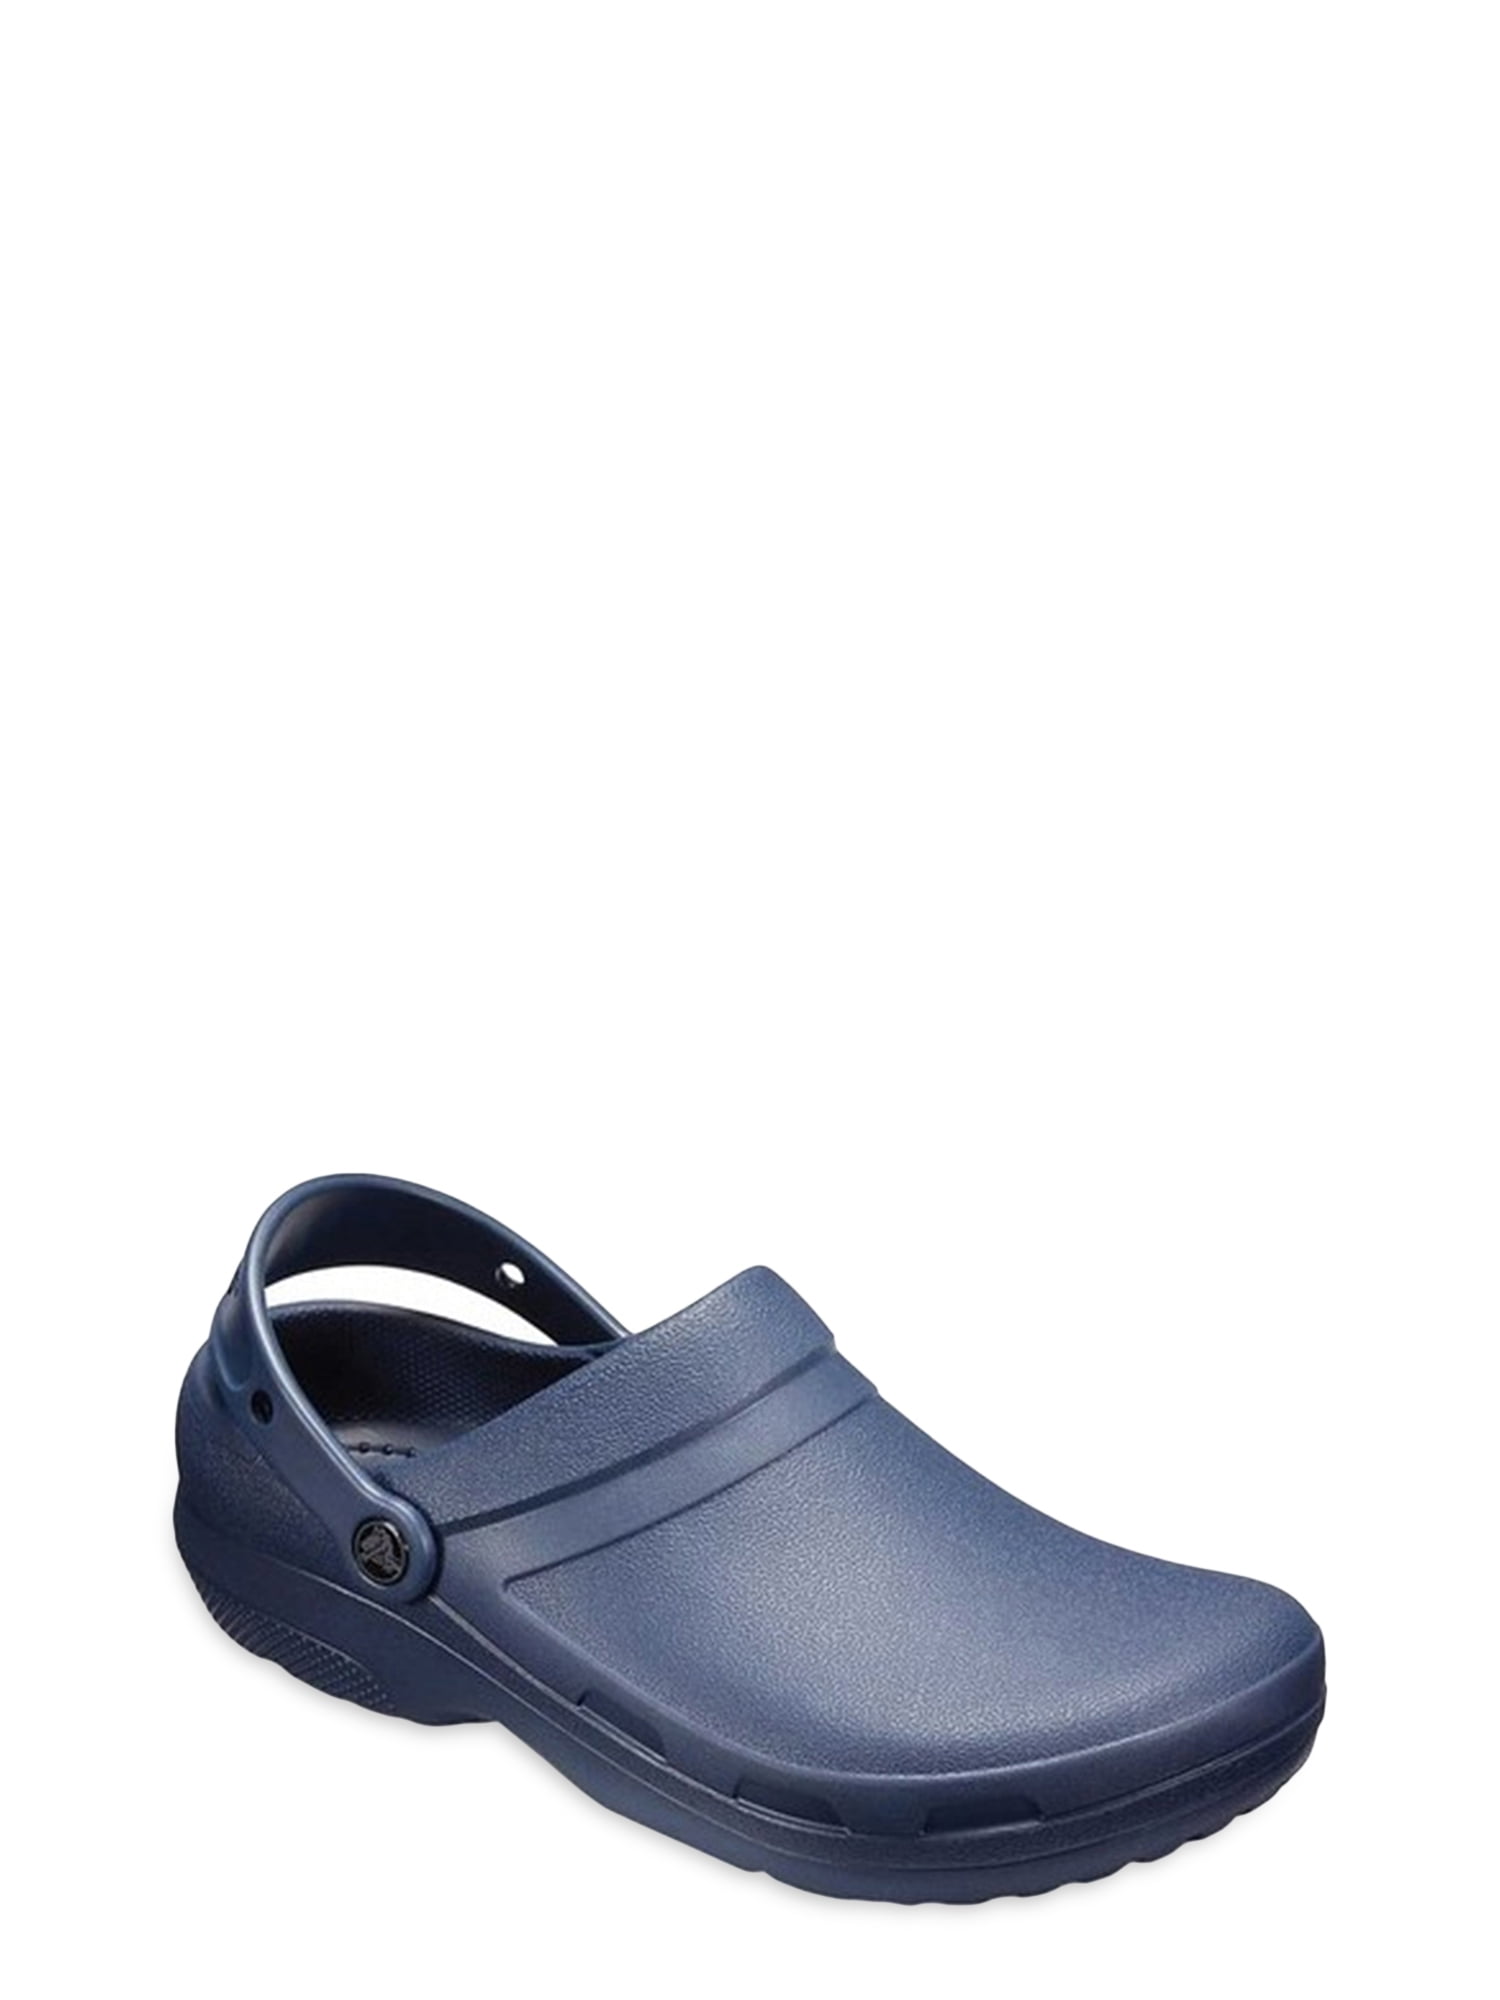 Crocs at Work - Crocs at Work Specialist II Unisex Clog Work Shoes ...